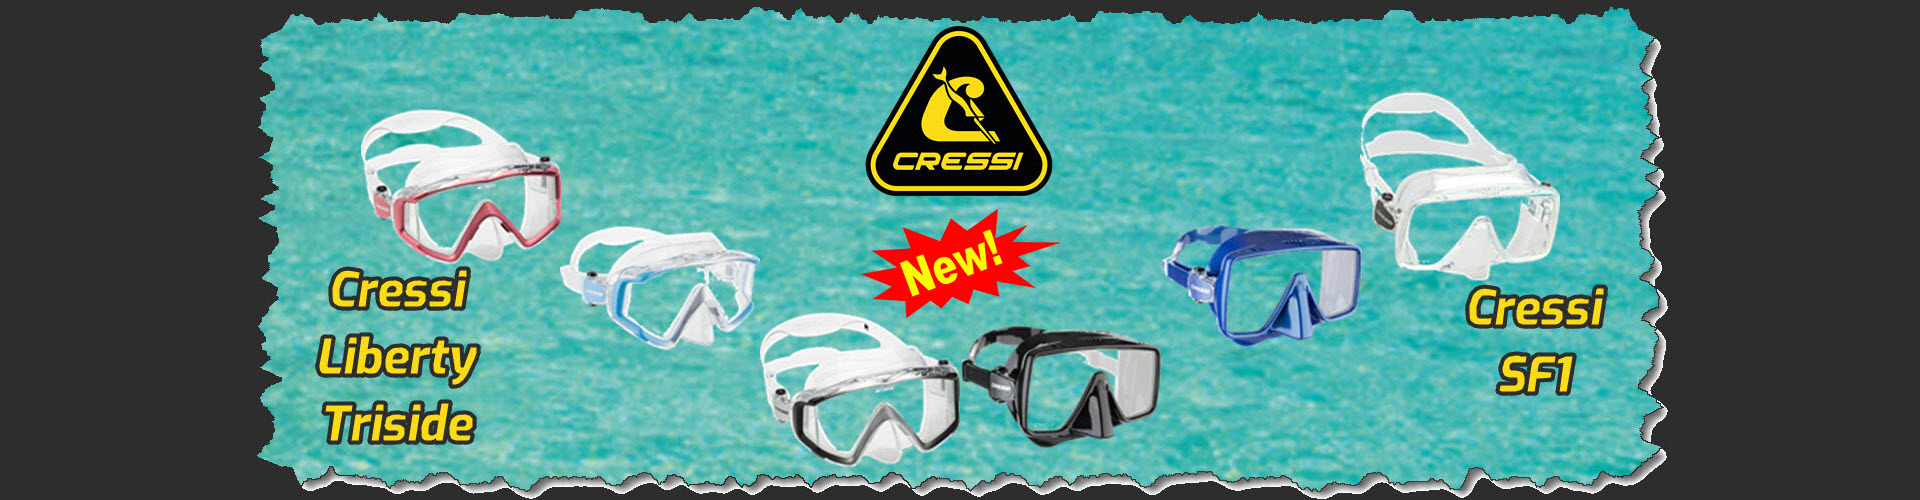 Cressi Liberty Triside and SF1 masks